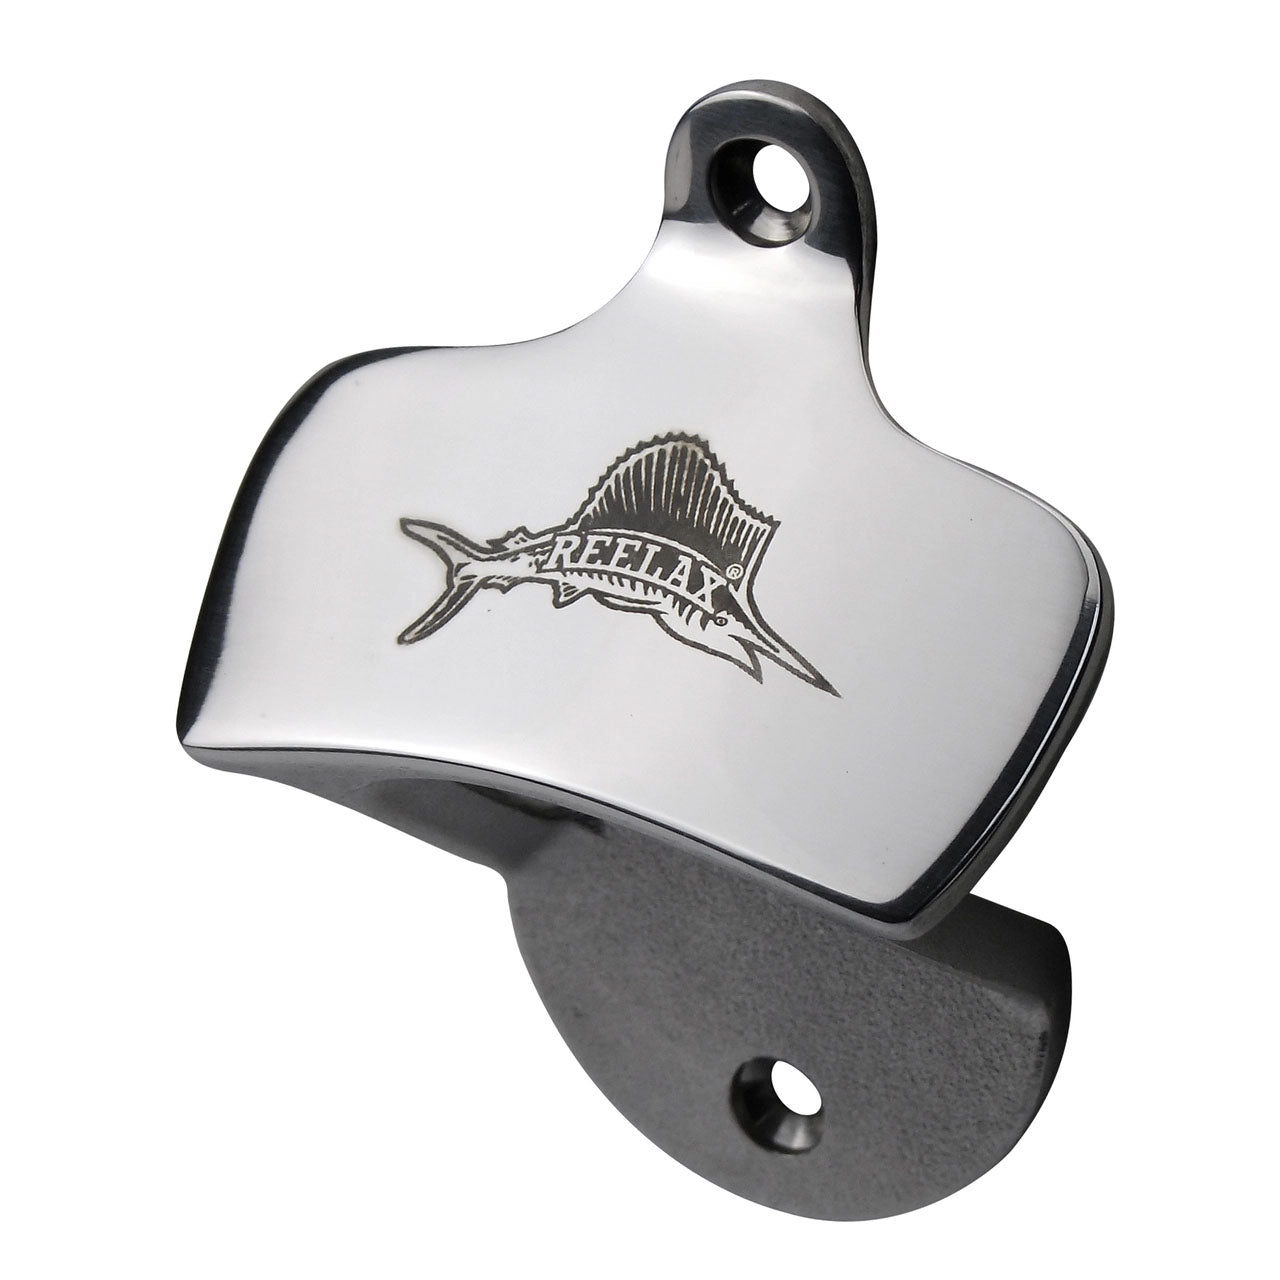 Reelax Bottle Opener 316G Stainless Steel-Accessories - Boating-Reelax-Fishing Station